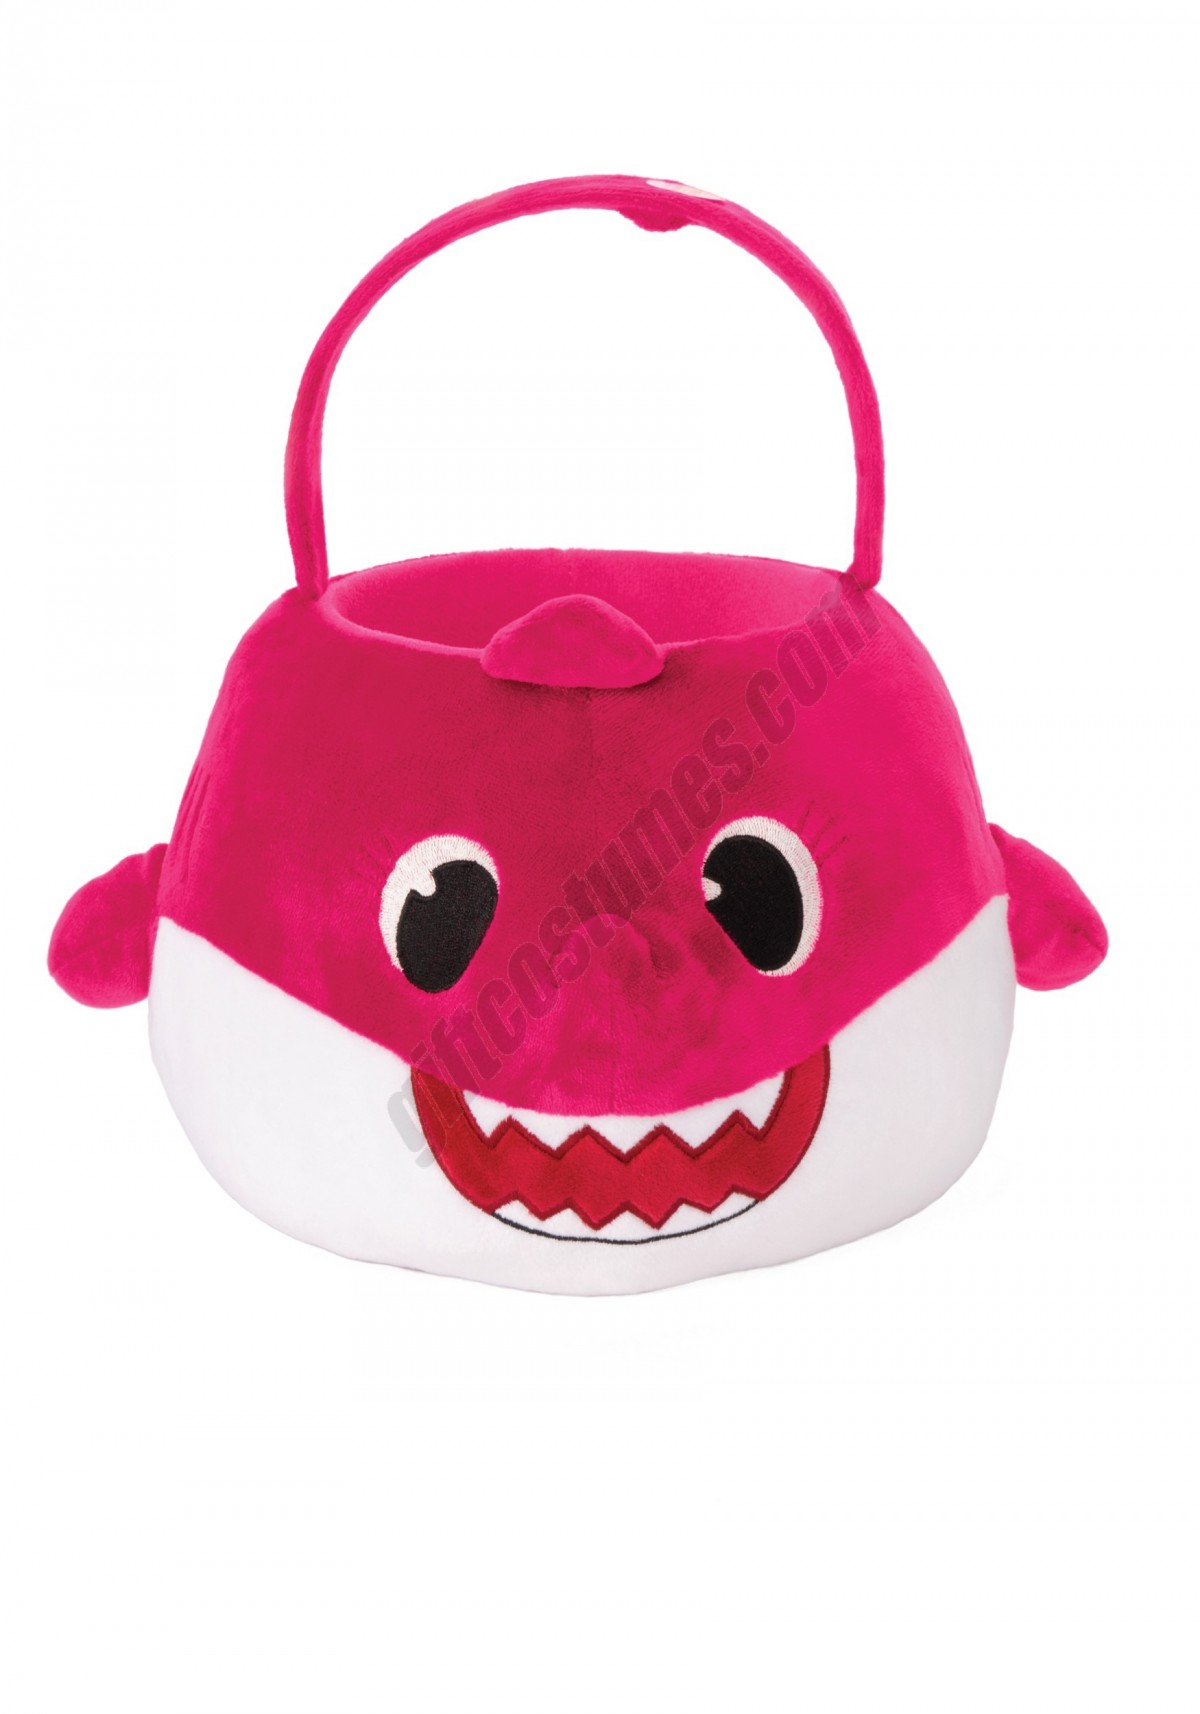 Mommyshark Treat Tote with Soundchip Promotions - -0